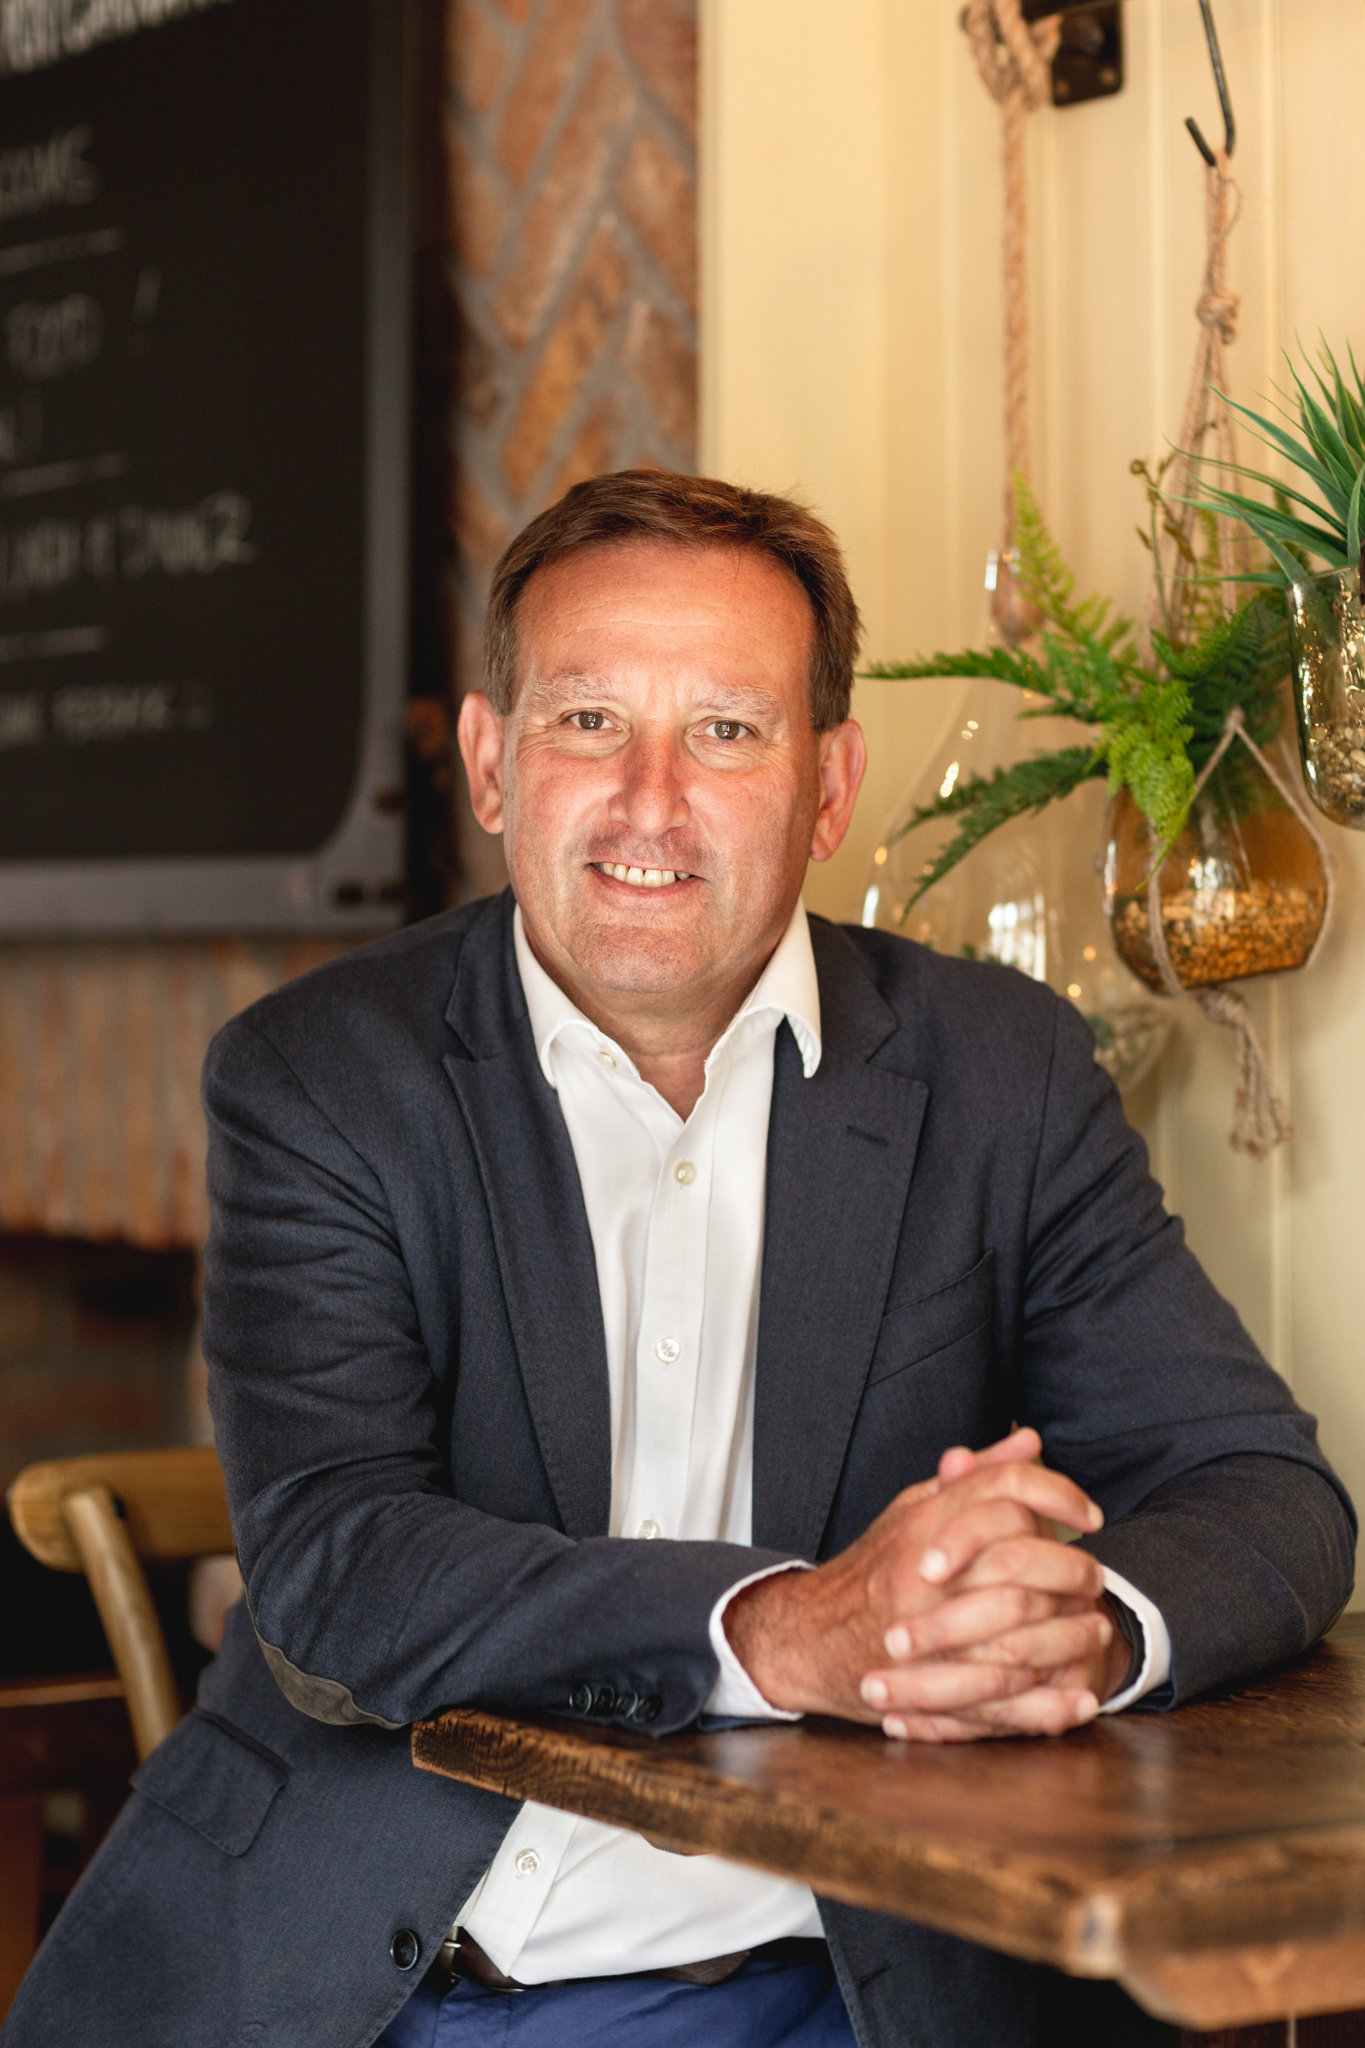 Clive Watson, executive chair of City Pub Group